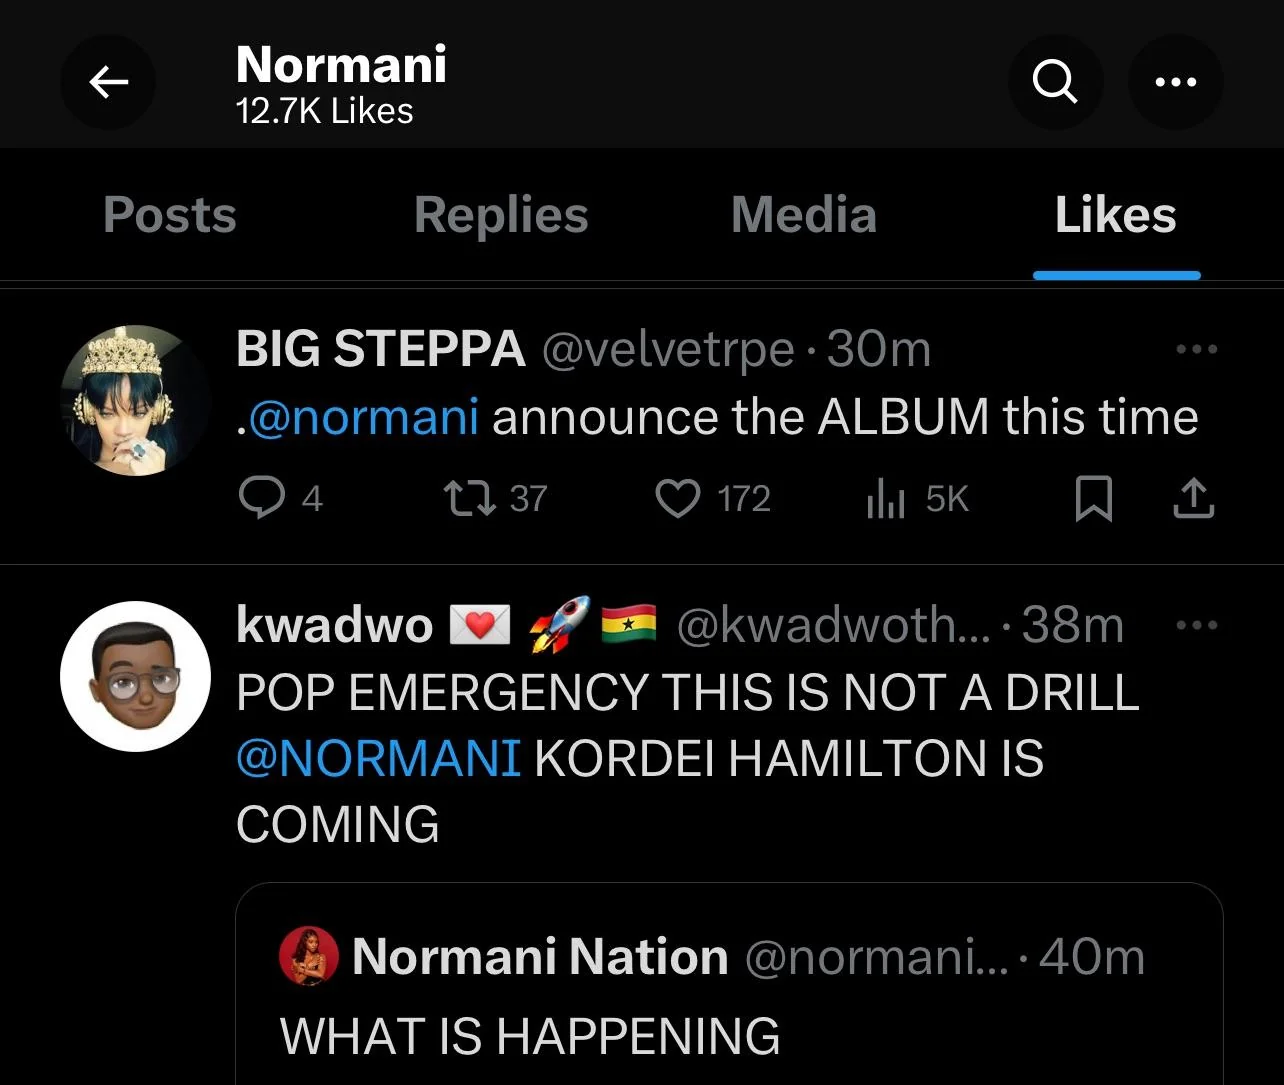 A screenshot of Normani's Twitter profile showing her "Likes" section